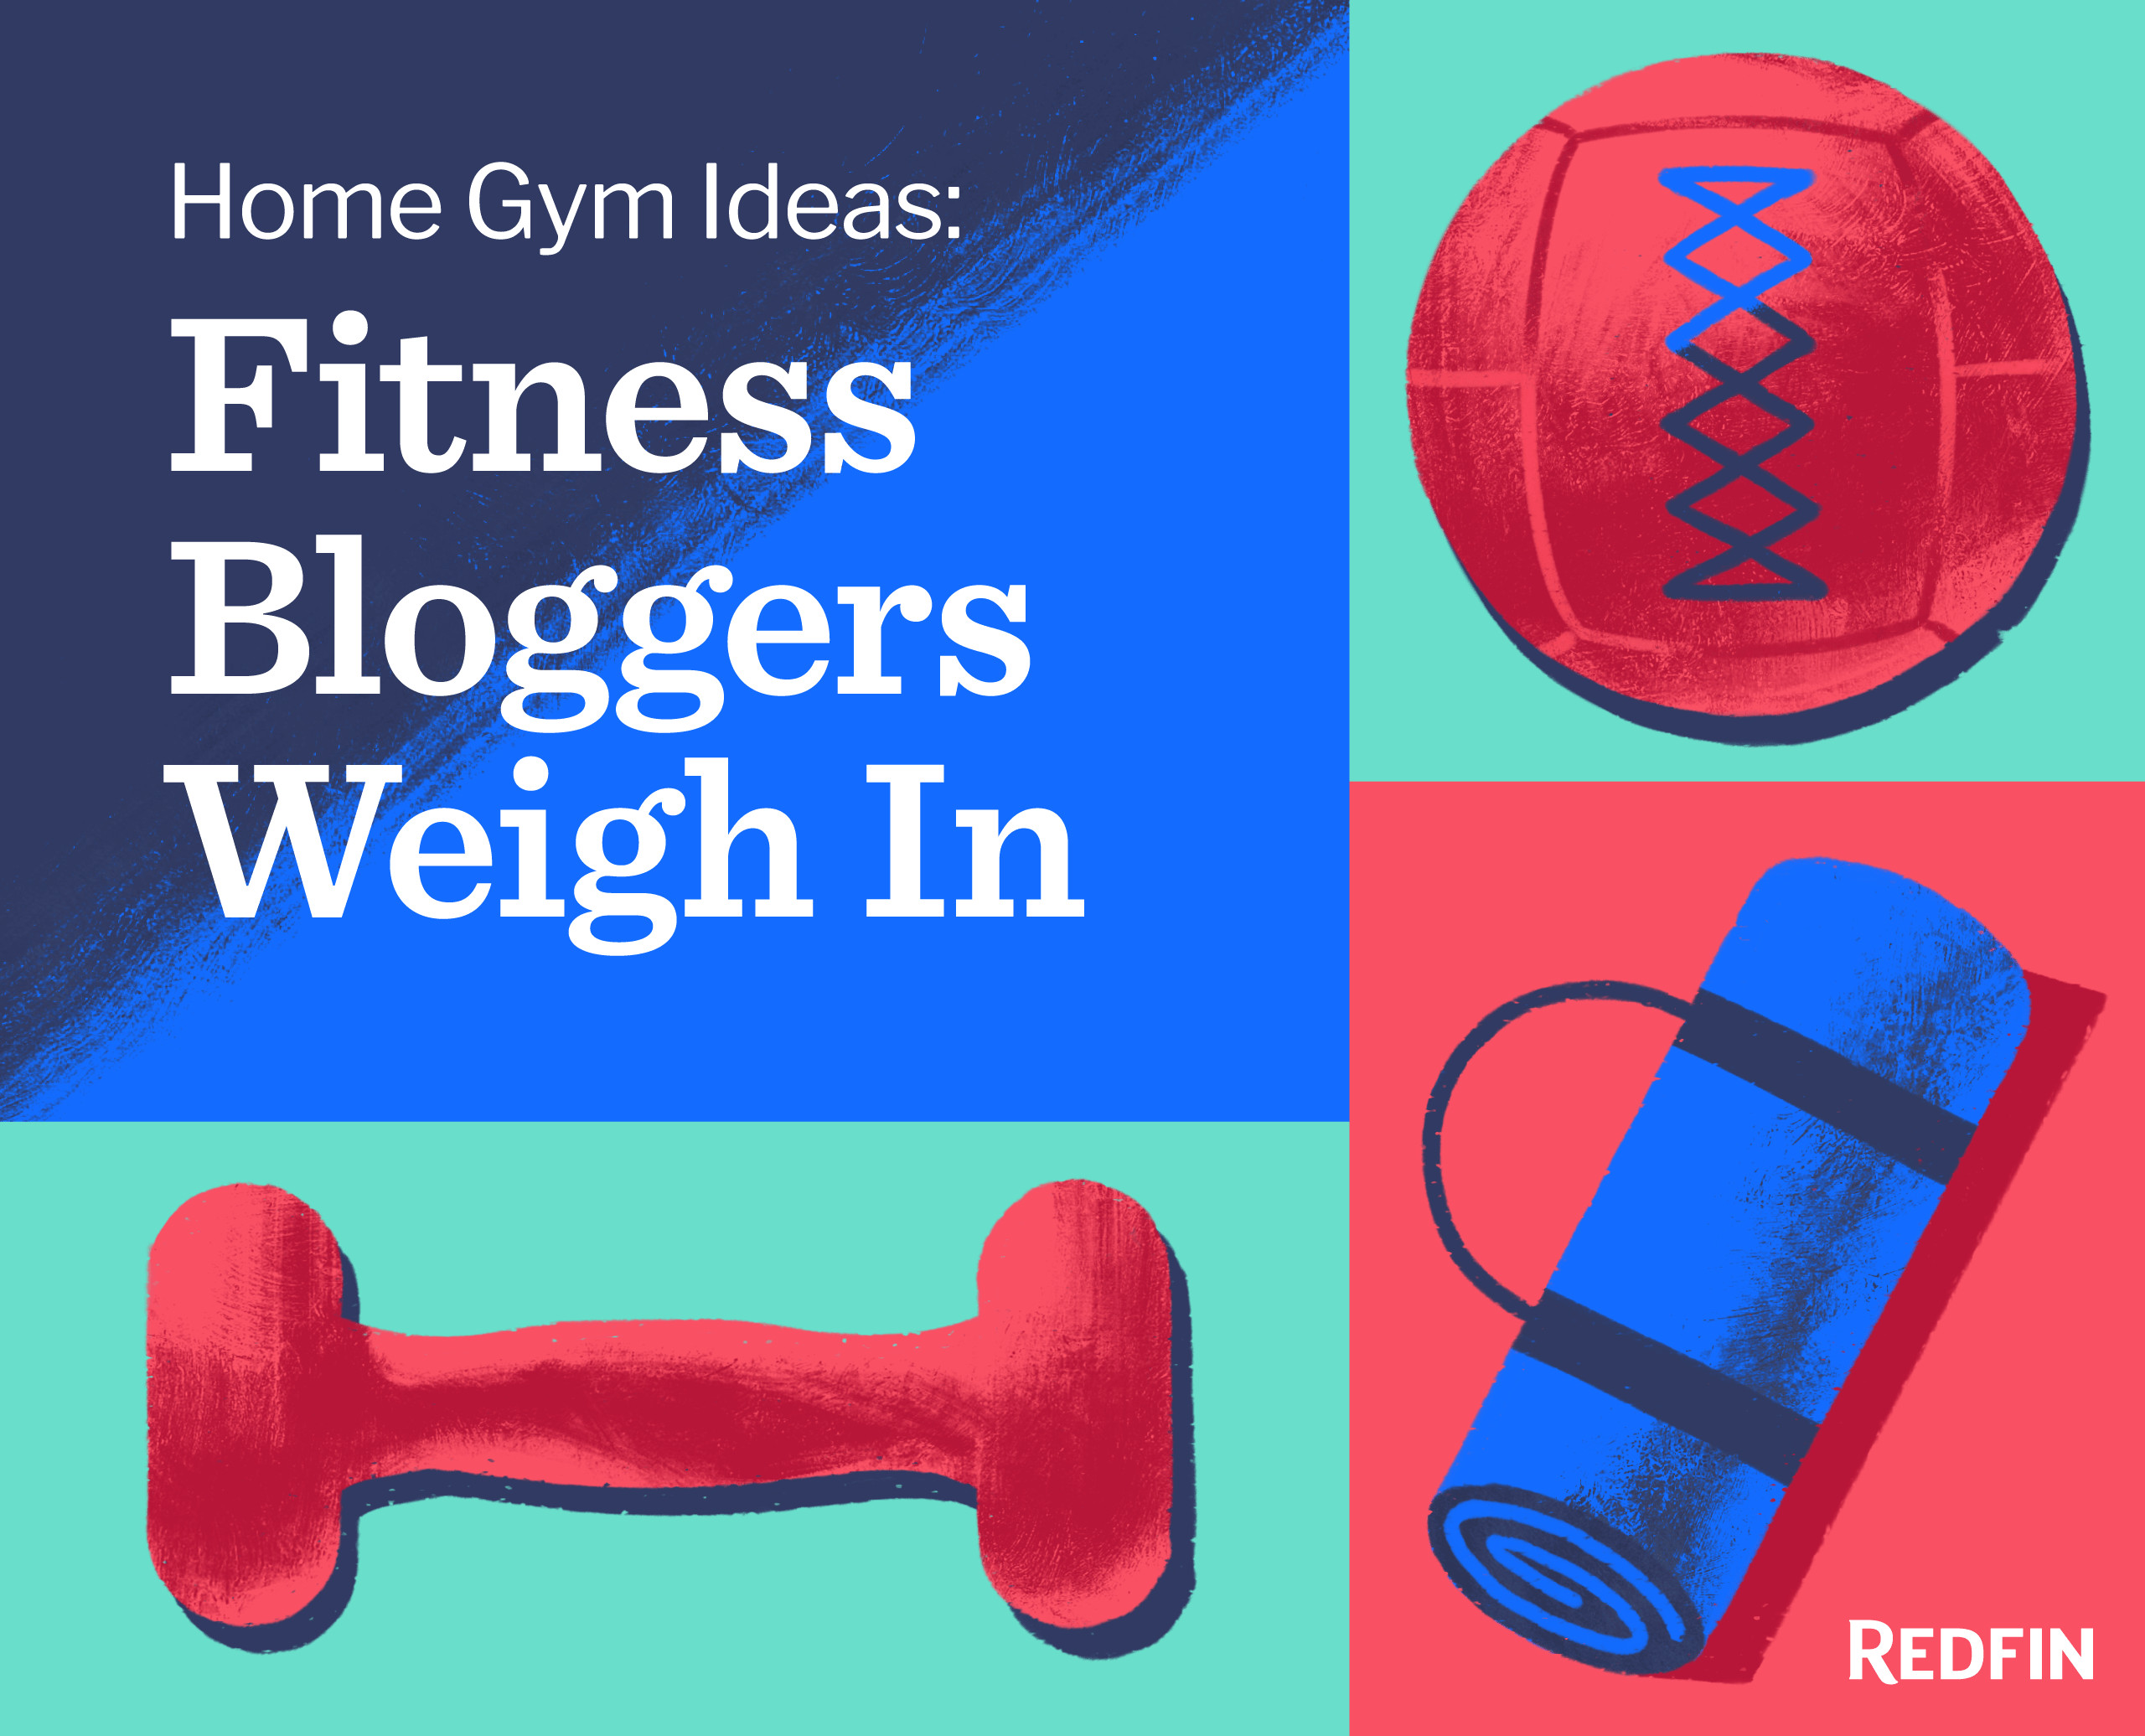 Home Gym Ideas for Exercise